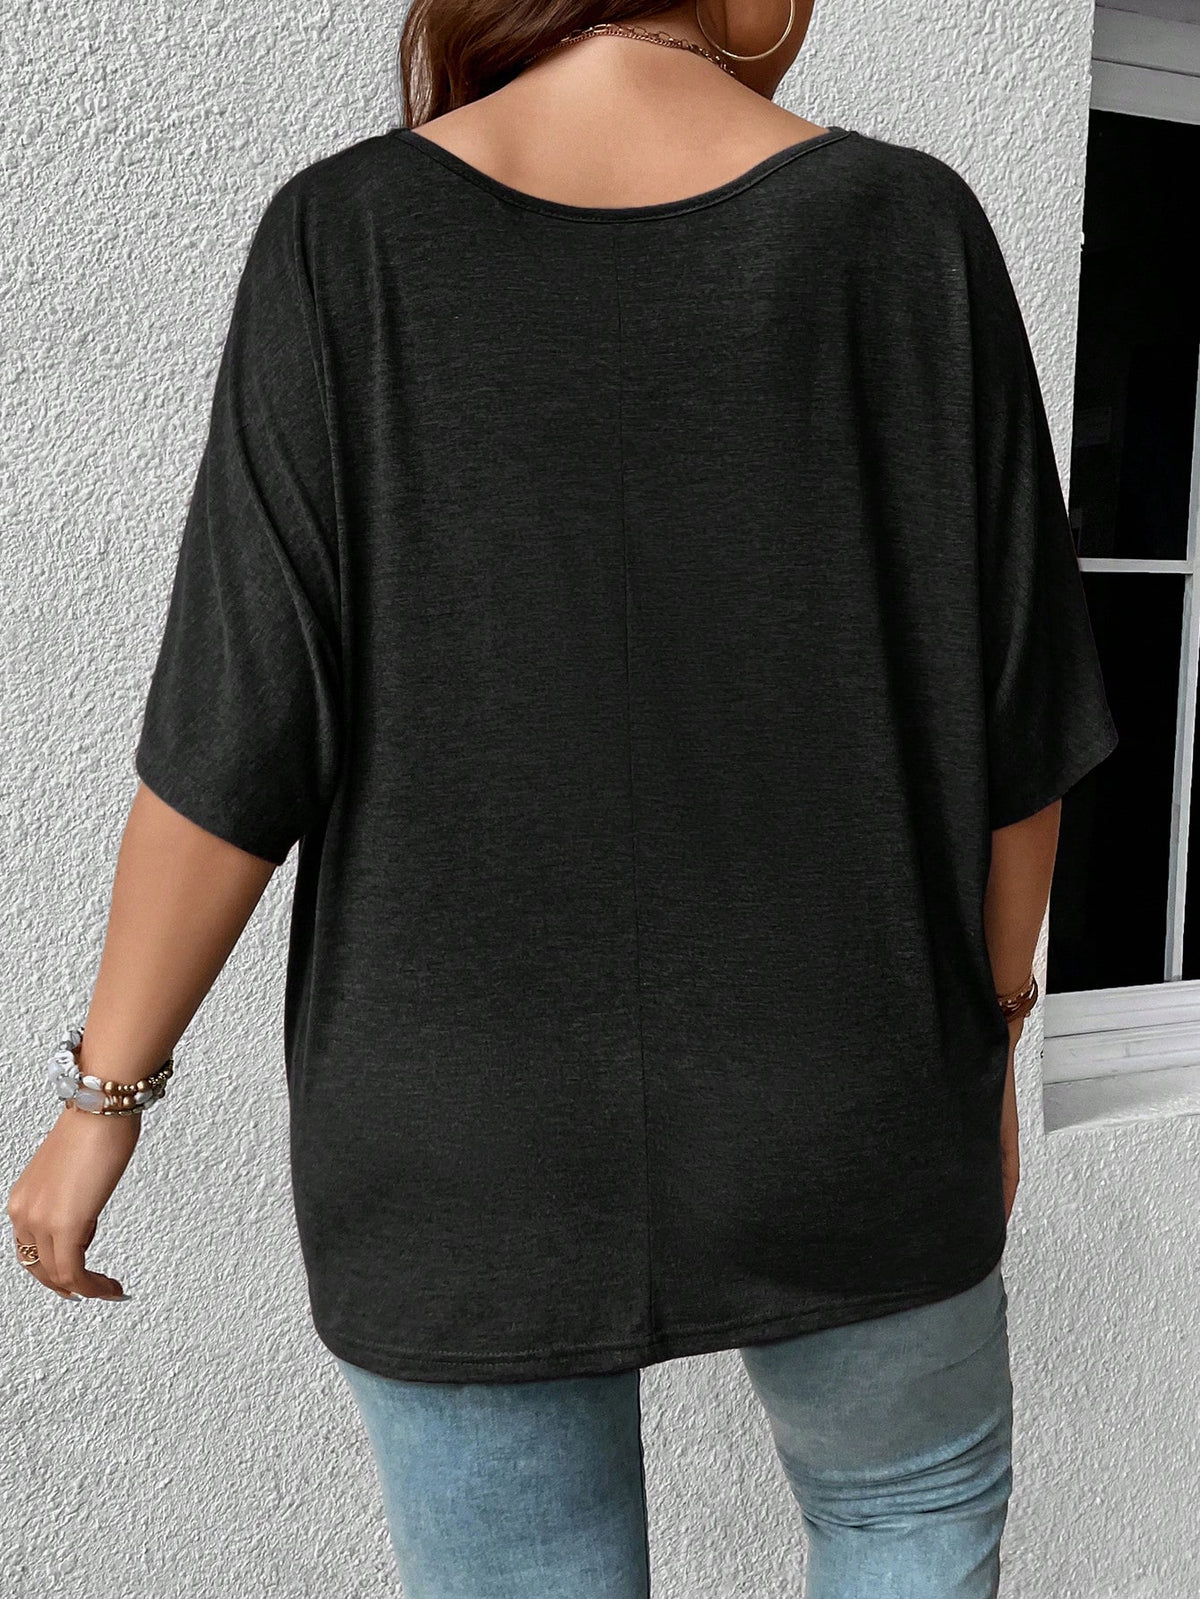 Plus Women's Tee with Batwing Sleeve